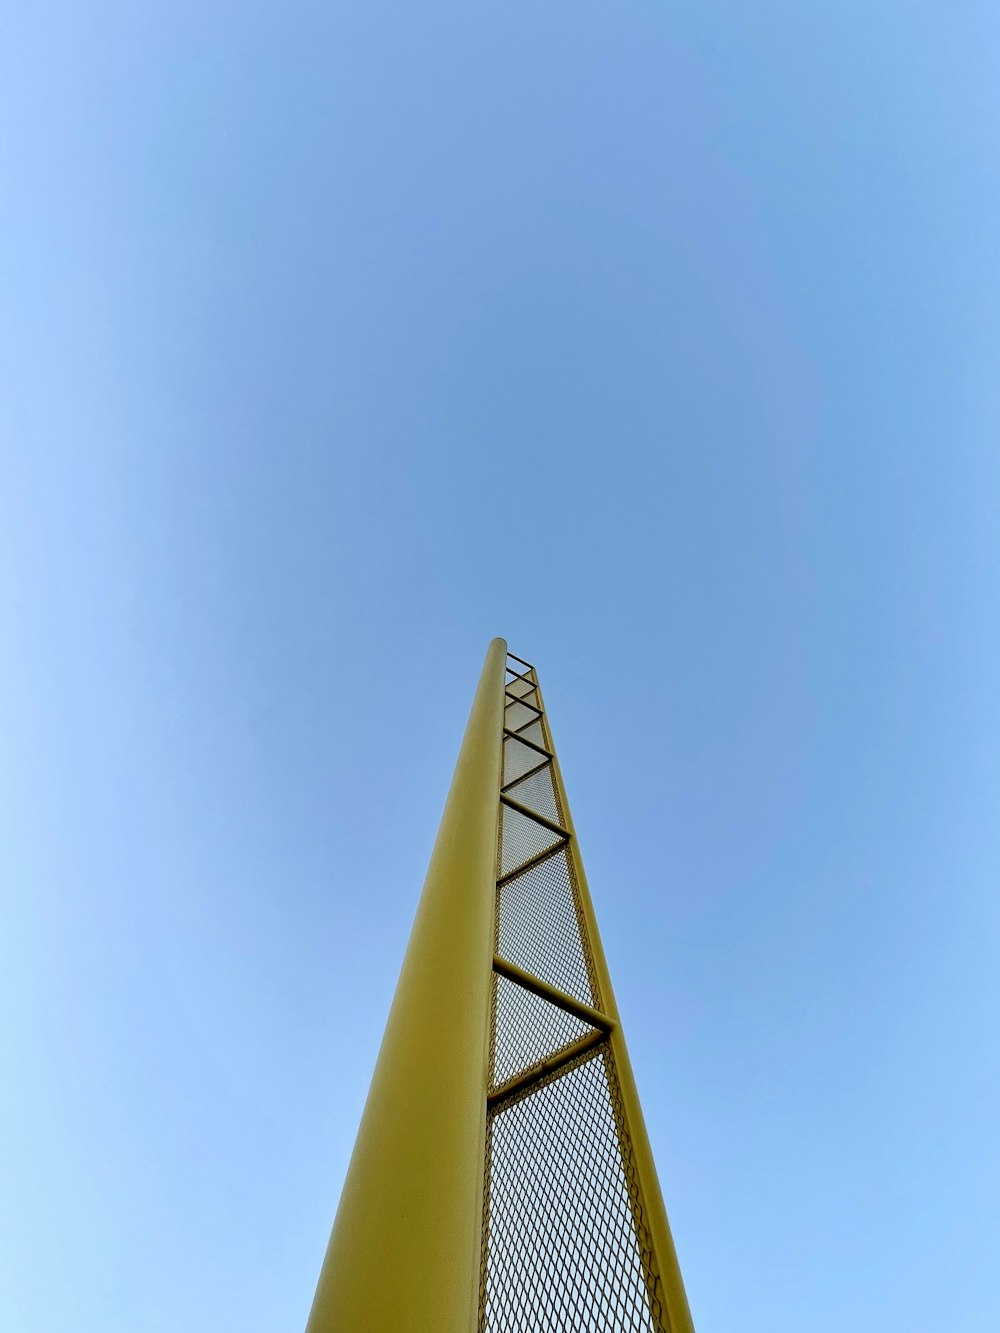 a tall metal tower